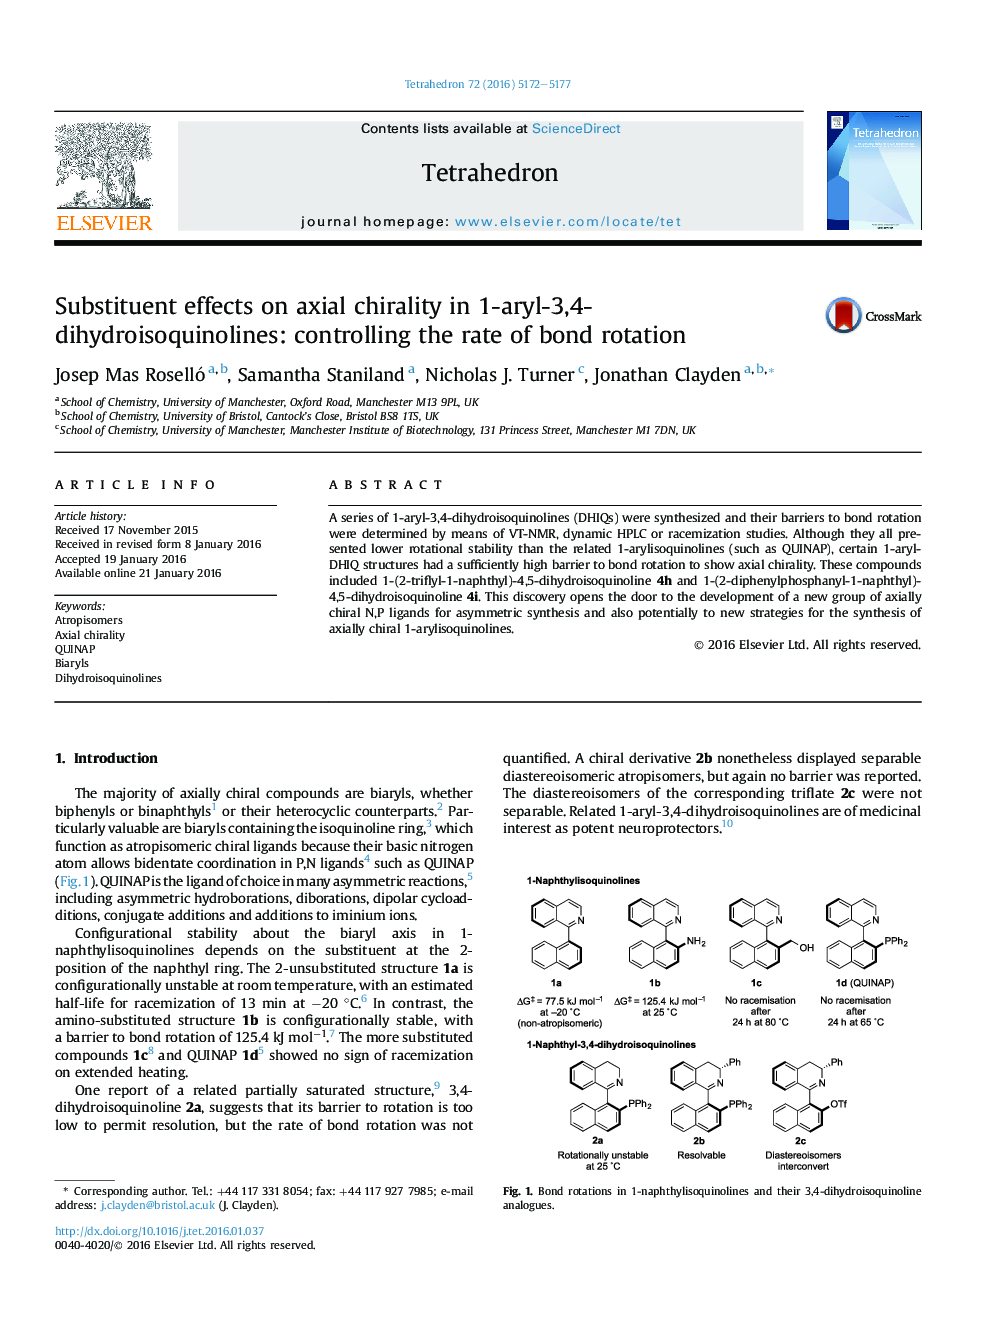 Substituent effects on axial chirality in 1-aryl-3,4-dihydroisoquinolines: controlling the rate of bond rotation